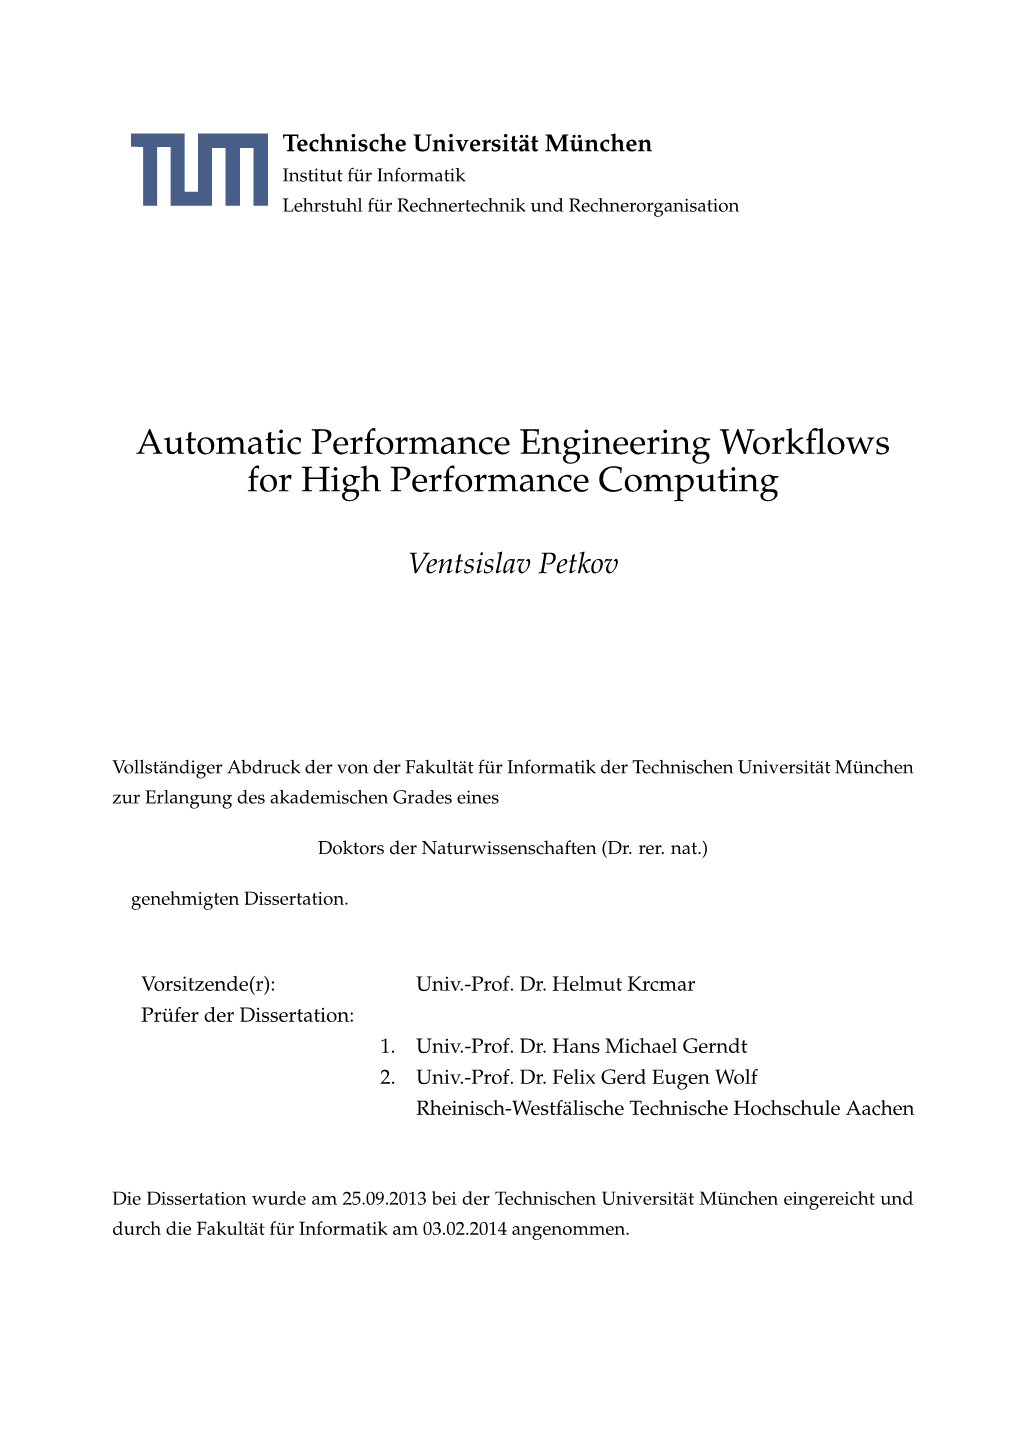 Automatic Performance Engineering Workflows for High Performance